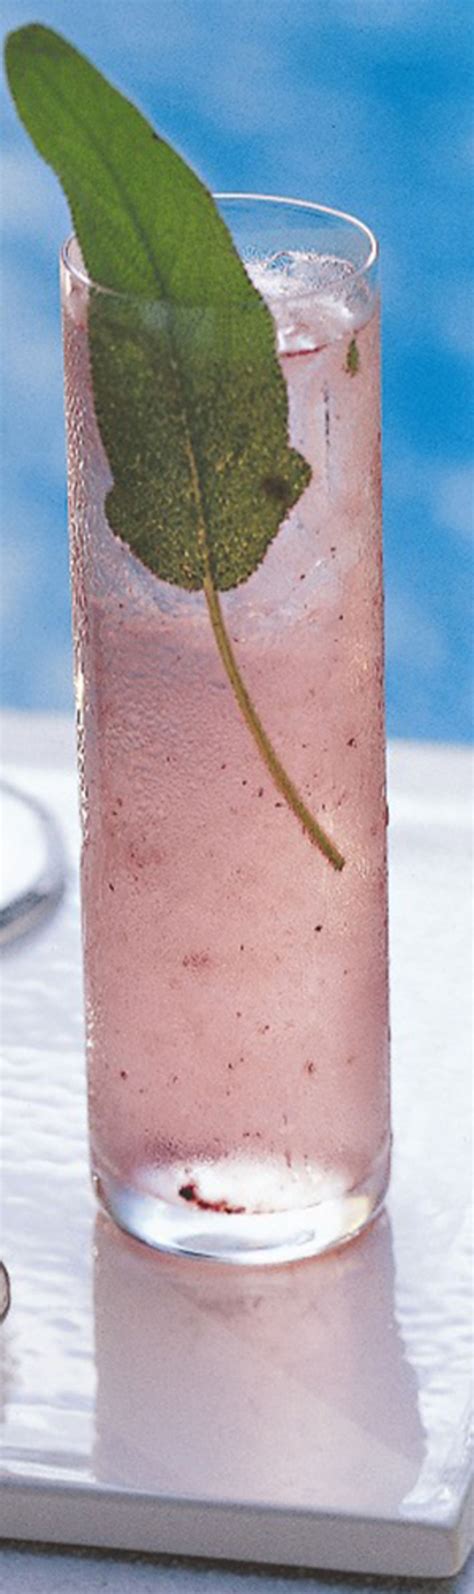 5 Healthy, Refreshing Mocktails (Alcohol Optional) to Kick Off Summertime | Watermelon mojito ...